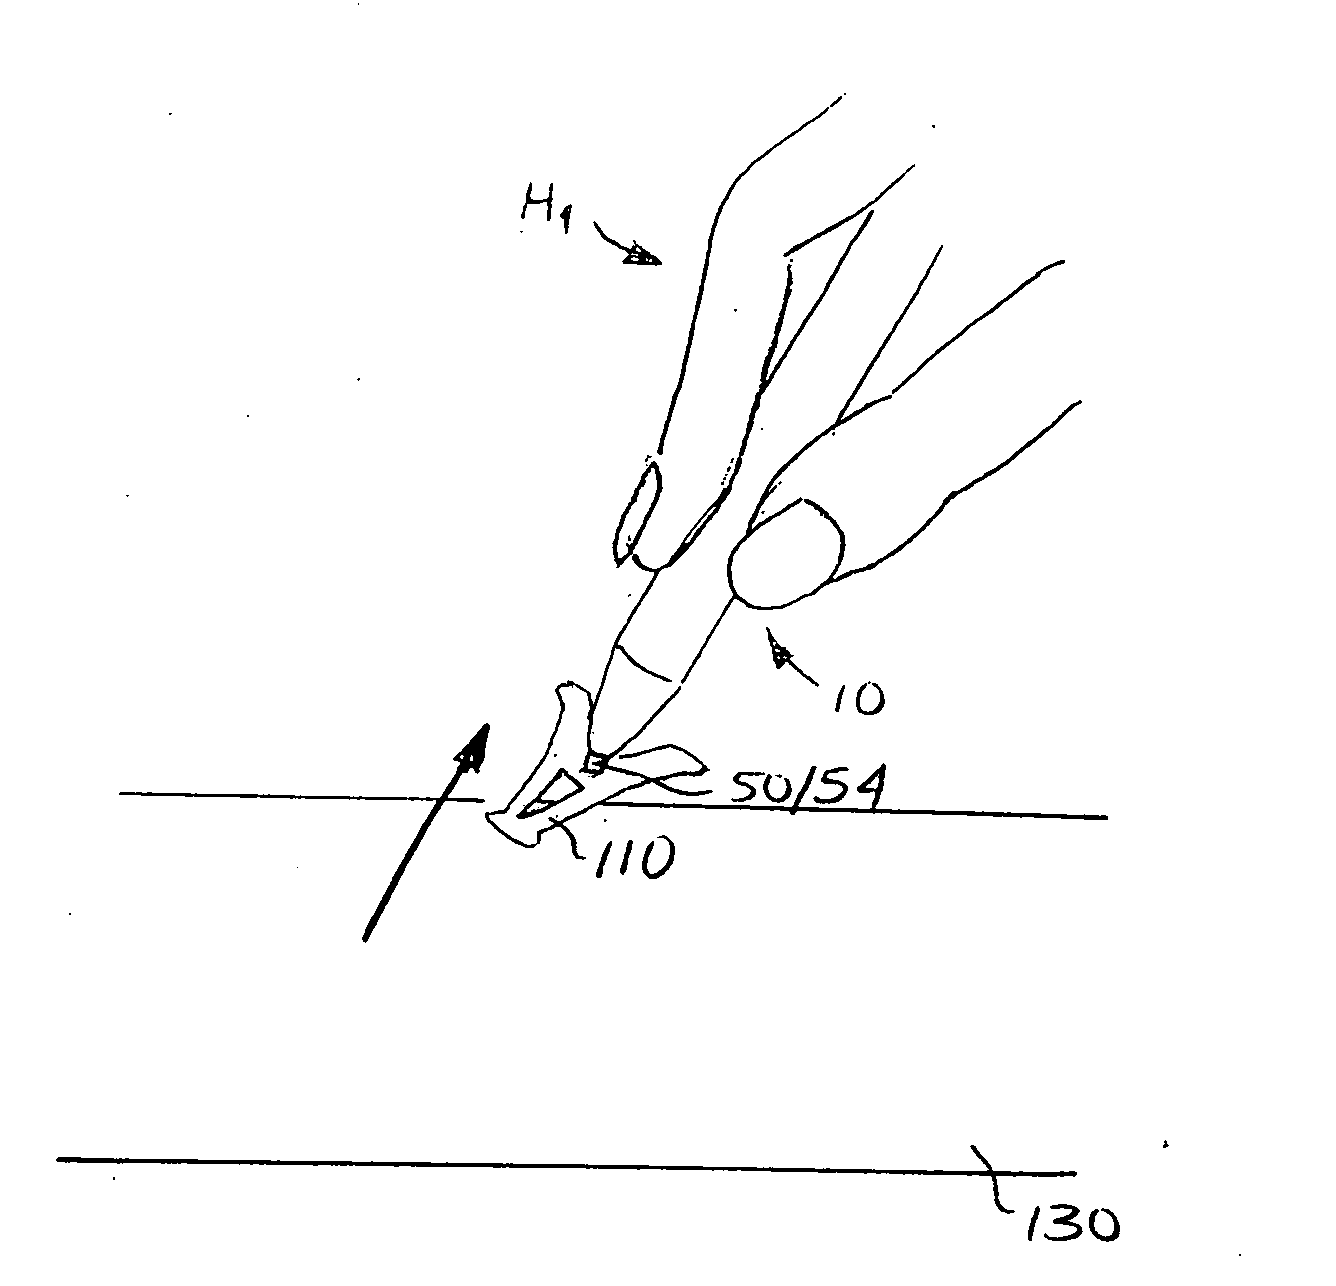 Hand-held pick-and-place apparatus with adhesive grasping element, components thereof, and associated methods